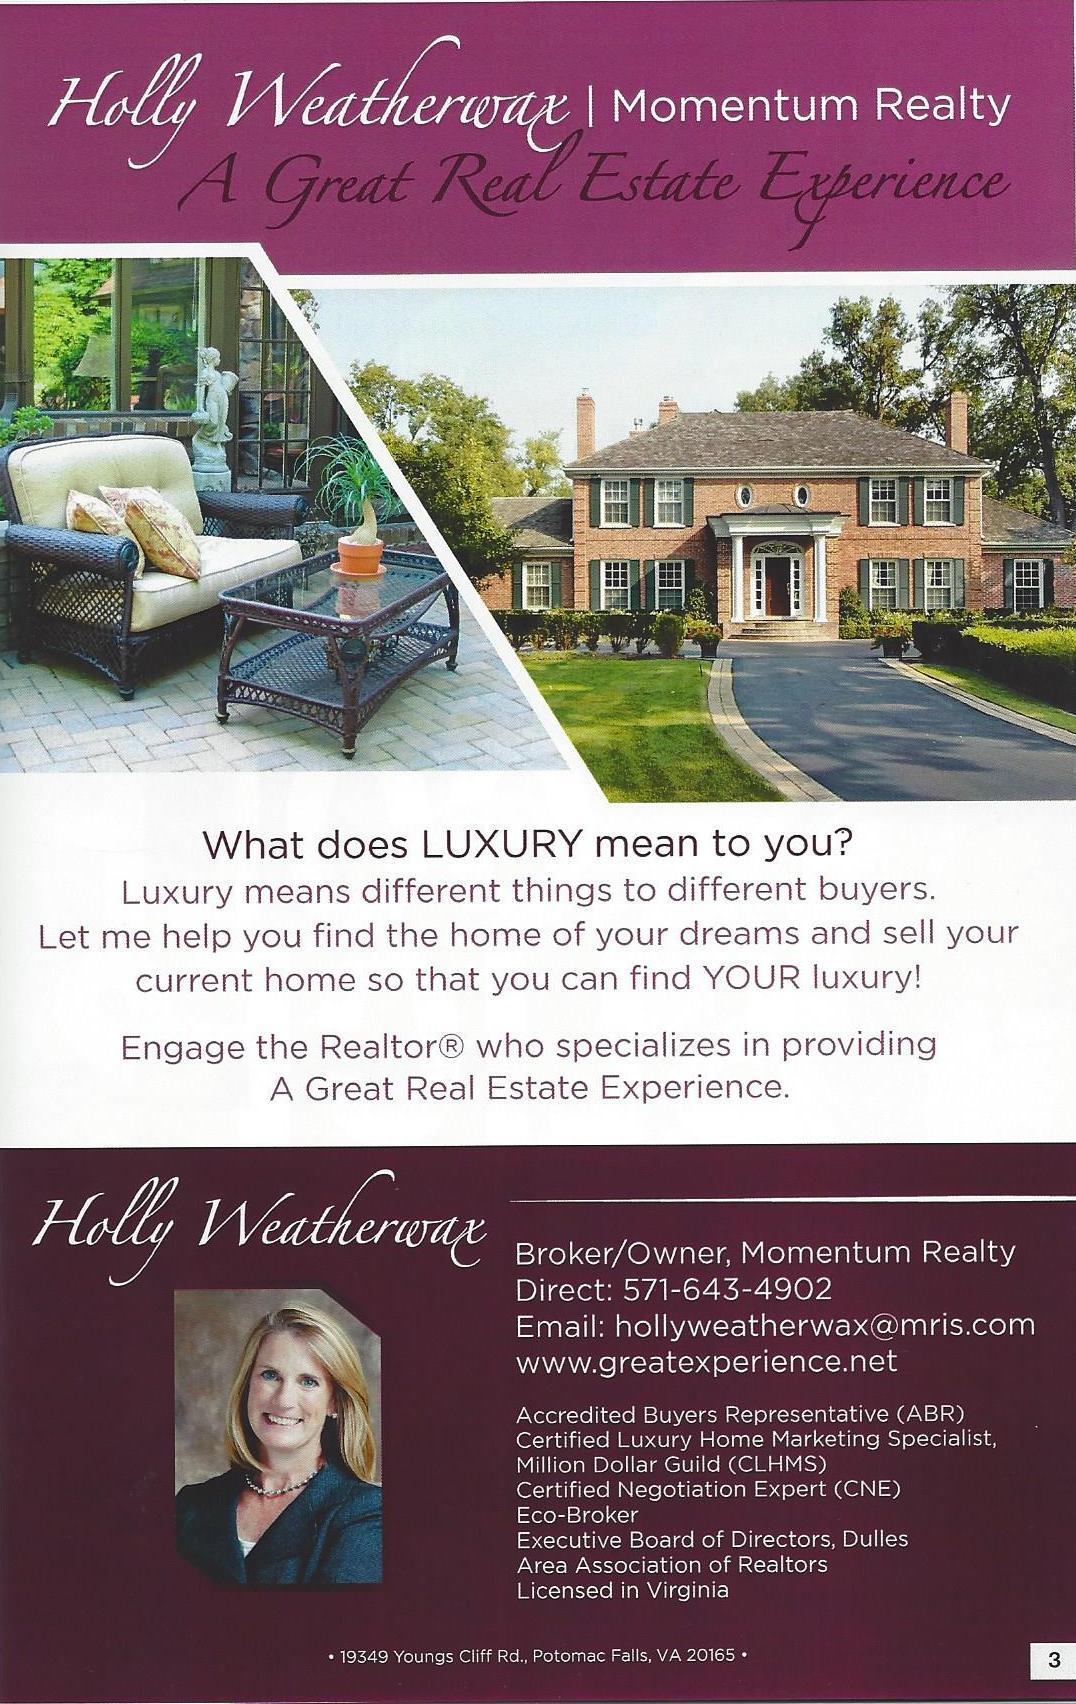 Are you interested in buying or selling a luxury home in Northern Virginia? It is important to select an agent who understands the market.